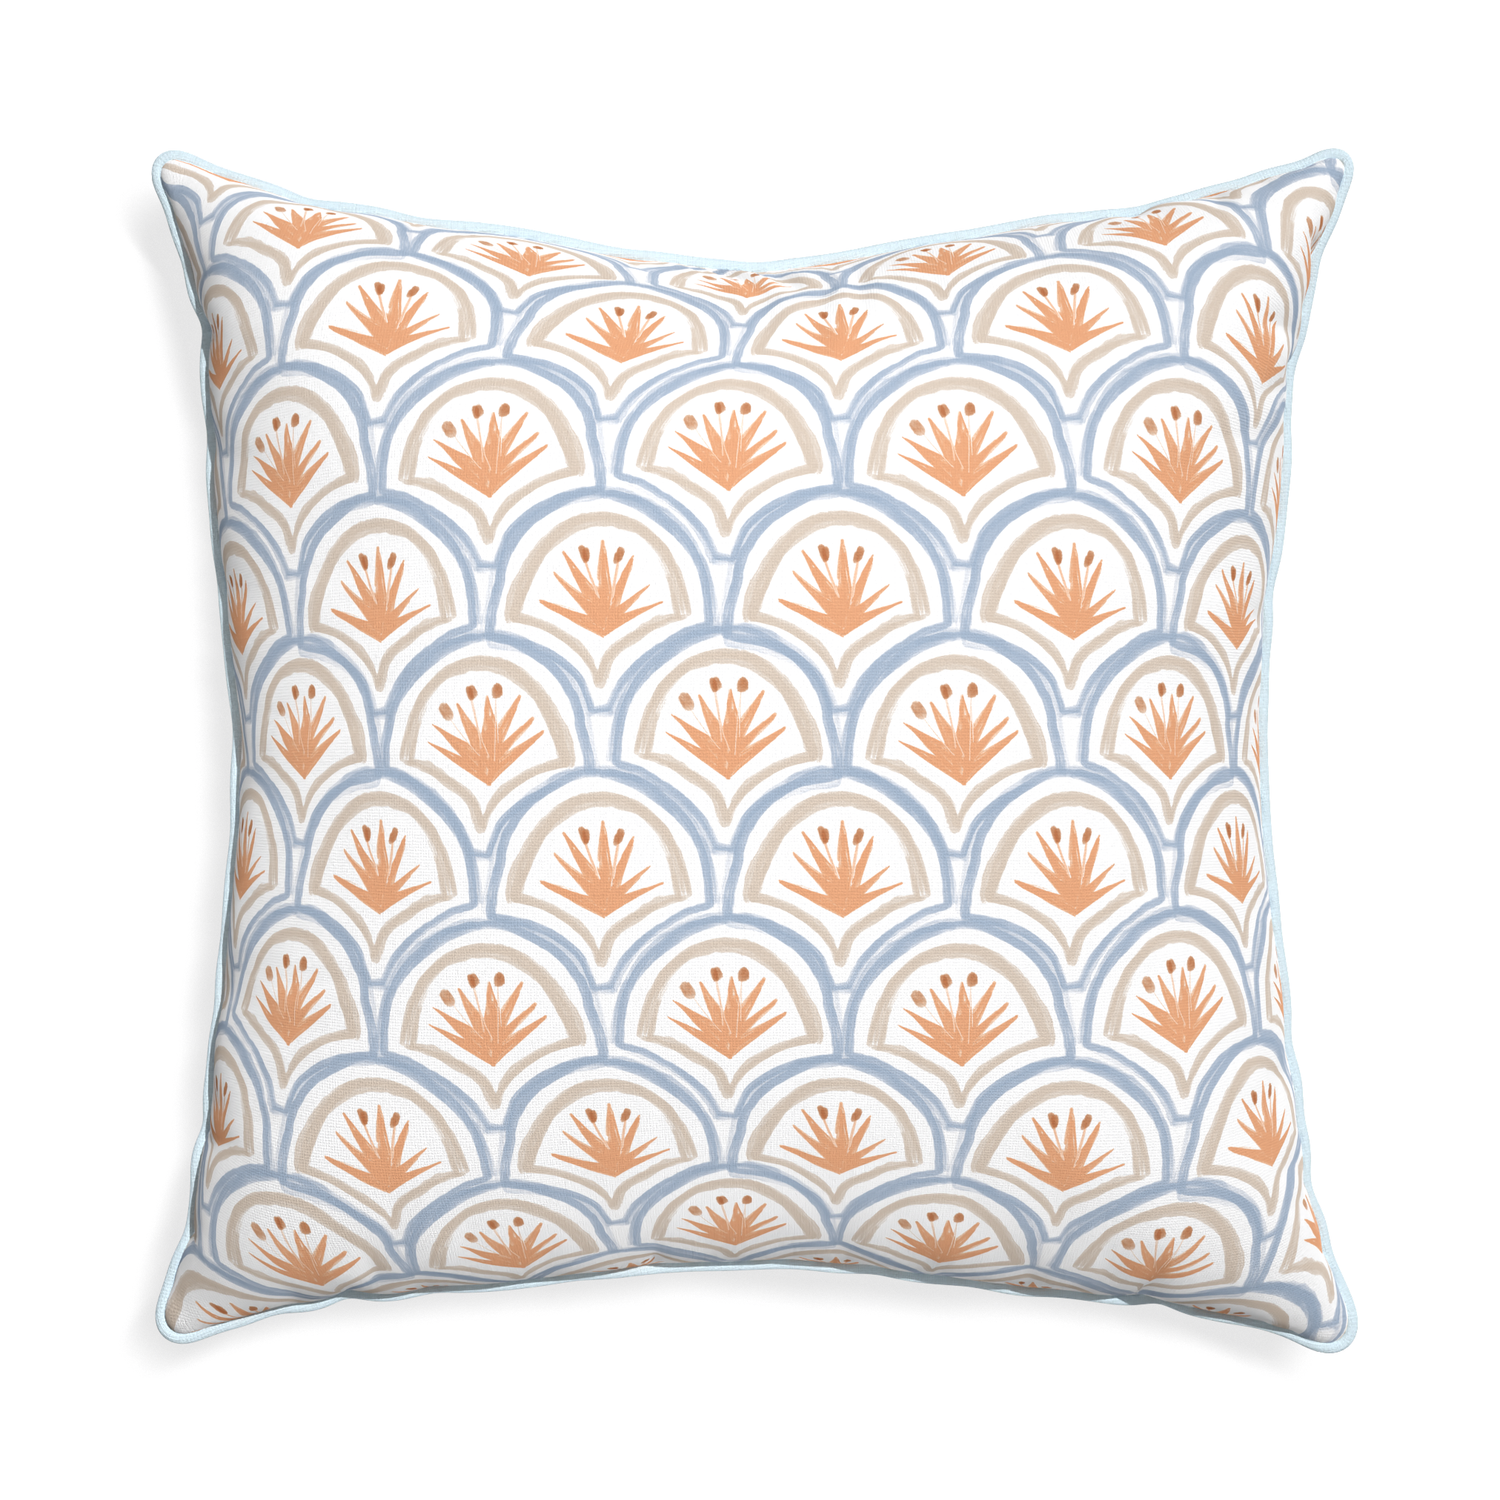 Euro-sham thatcher apricot custom art deco palm patternpillow with powder piping on white background